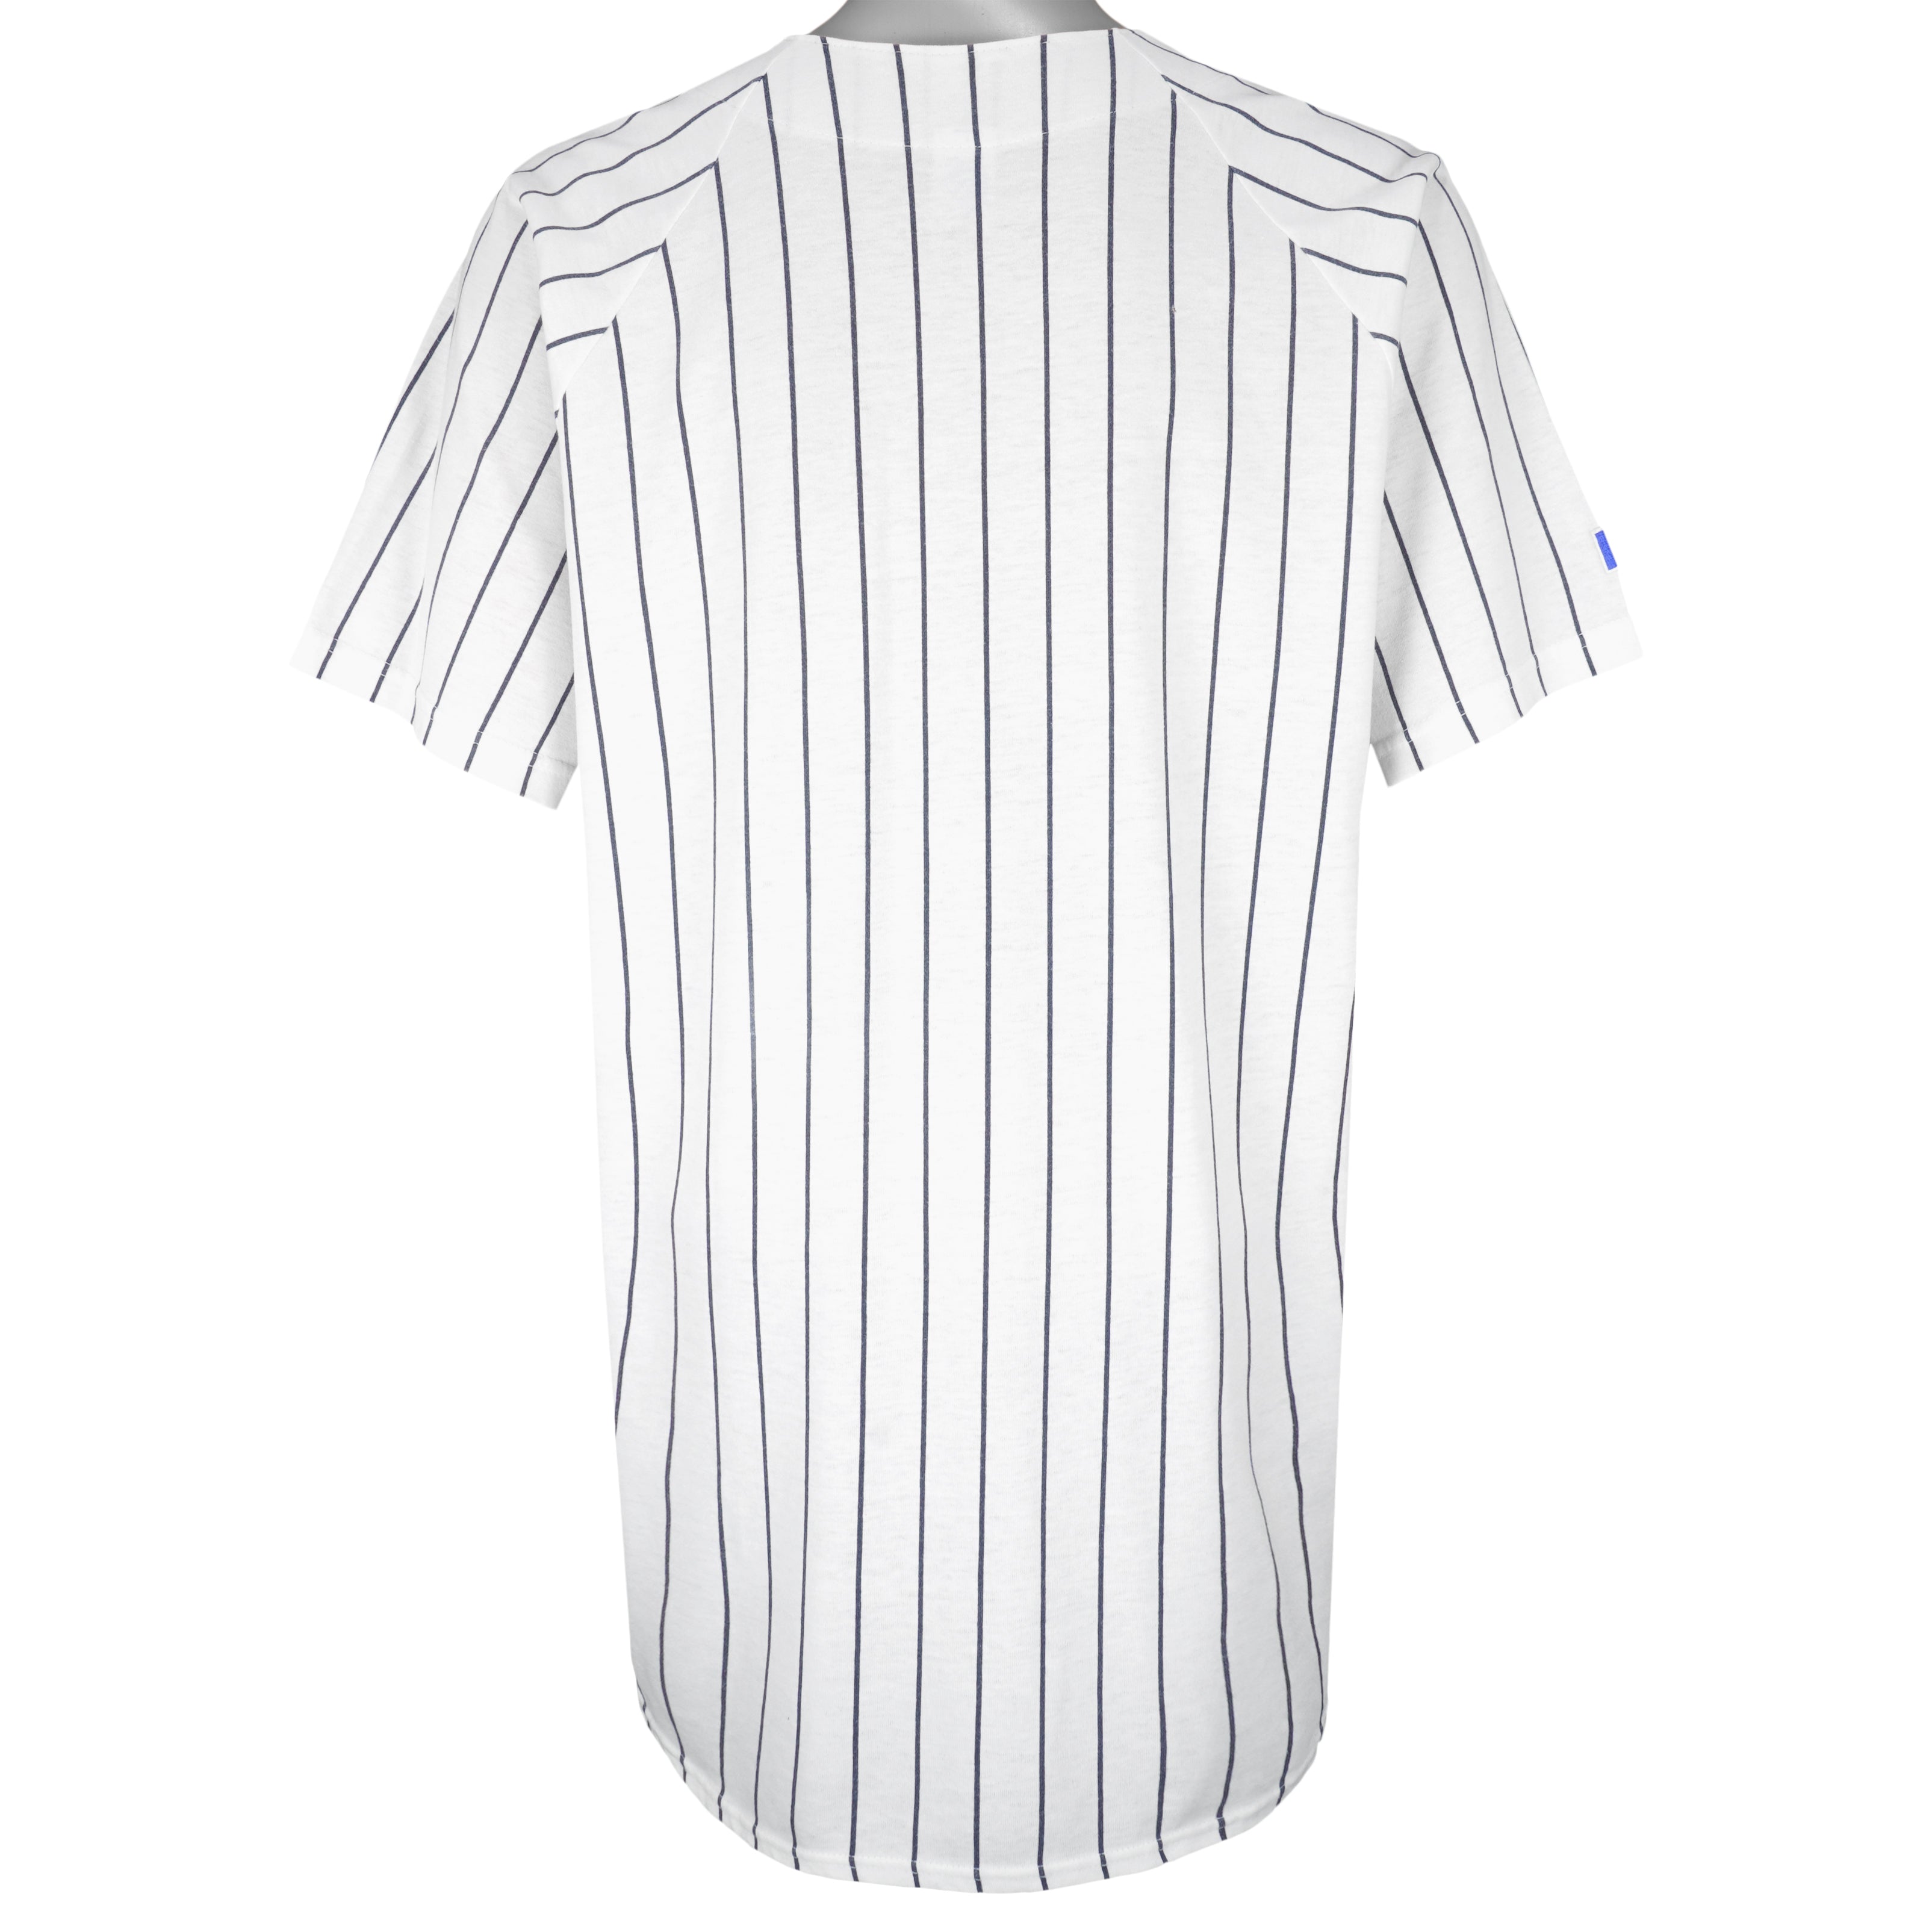 Russell Athletic New York Yankees MLB Fan Shop